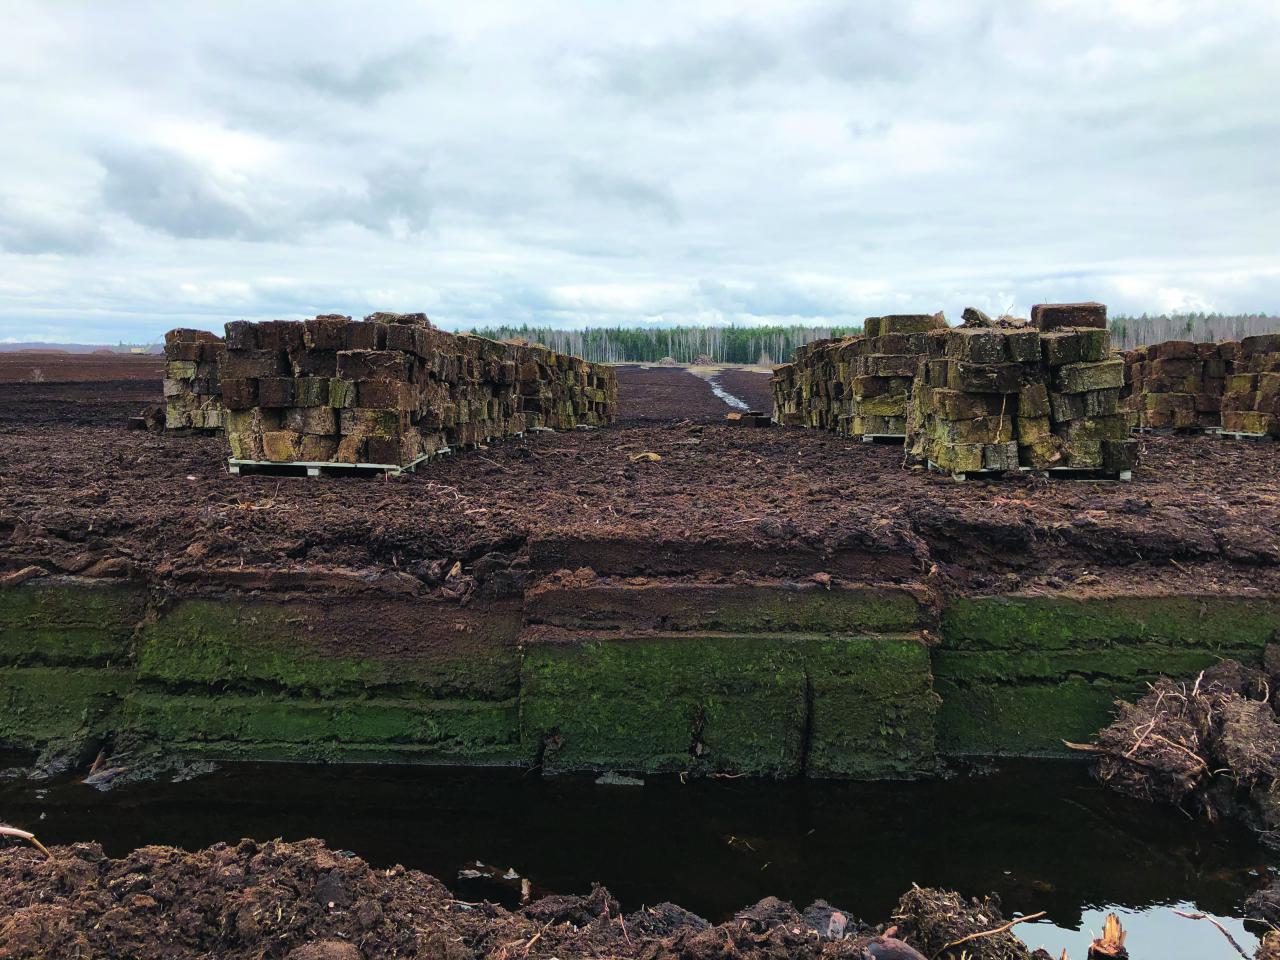 A lonely and monotonous landscape. On wooden pallets stand high stacks of peat blocks. In the front of the picture a small slope is visible. The sky is cloudy.